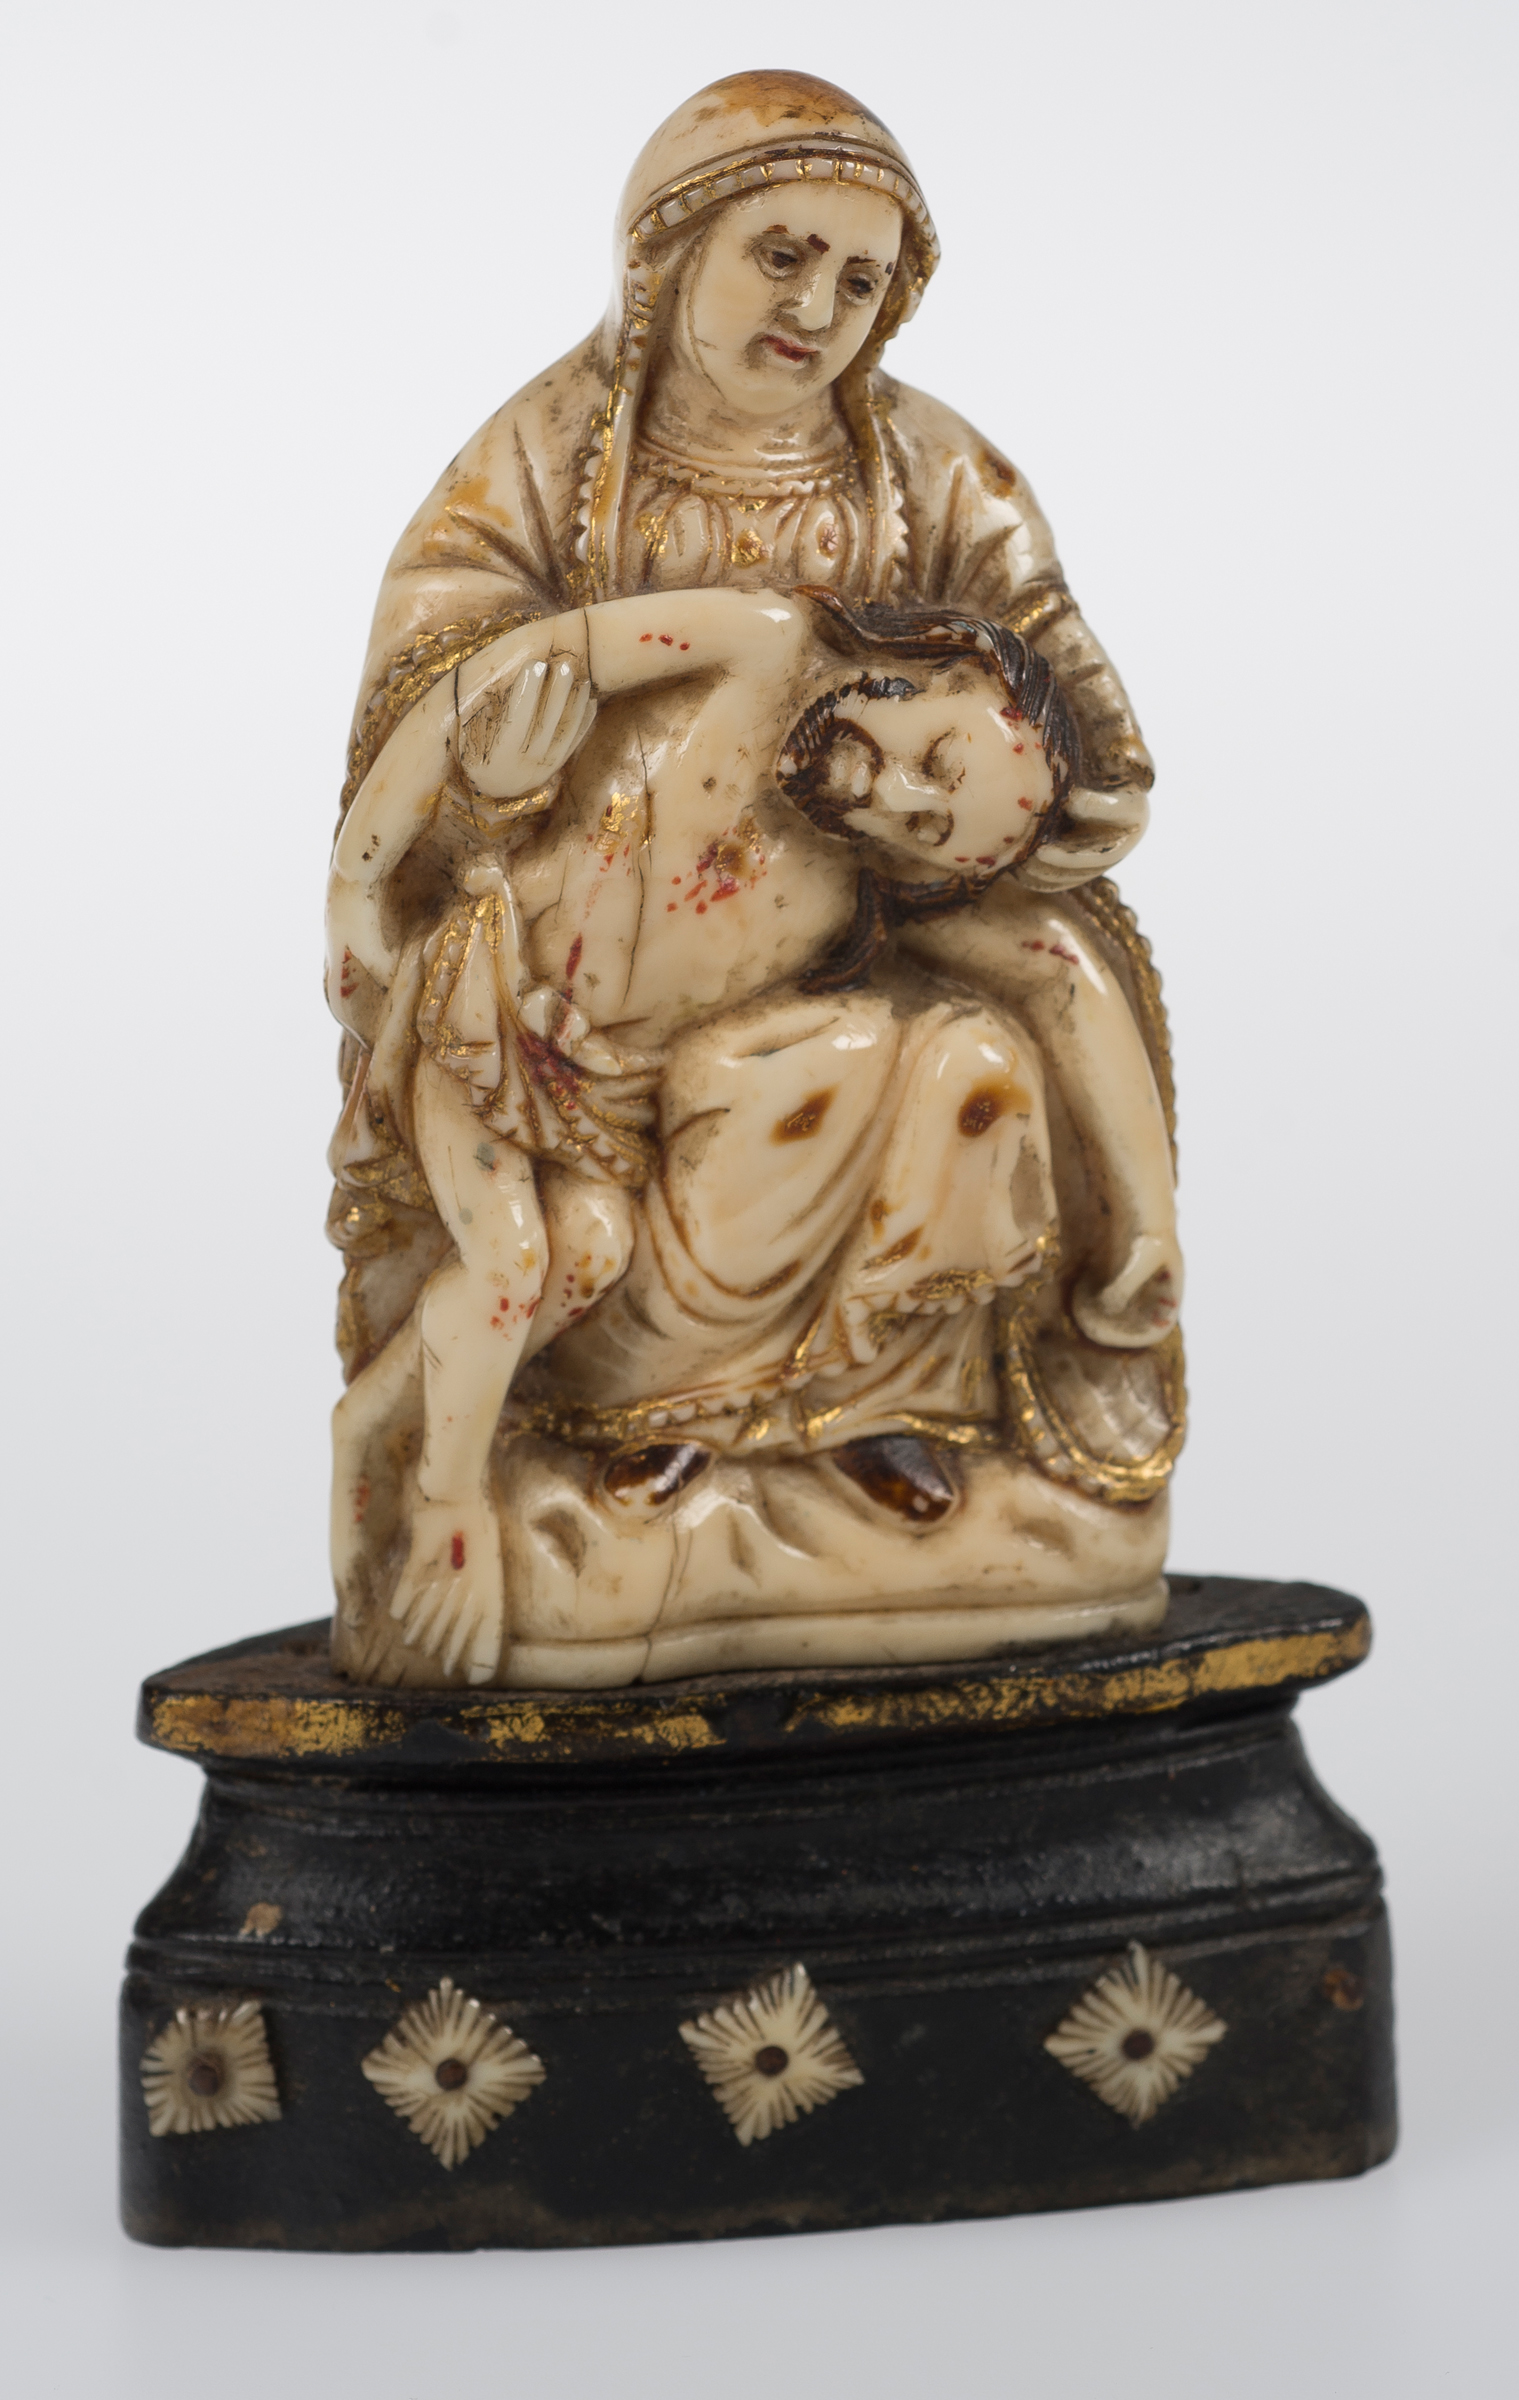 "Pietà". Ivory sculpture with polychrome and gilt residue. Indo-Portuguese work. Goa. Early 18th